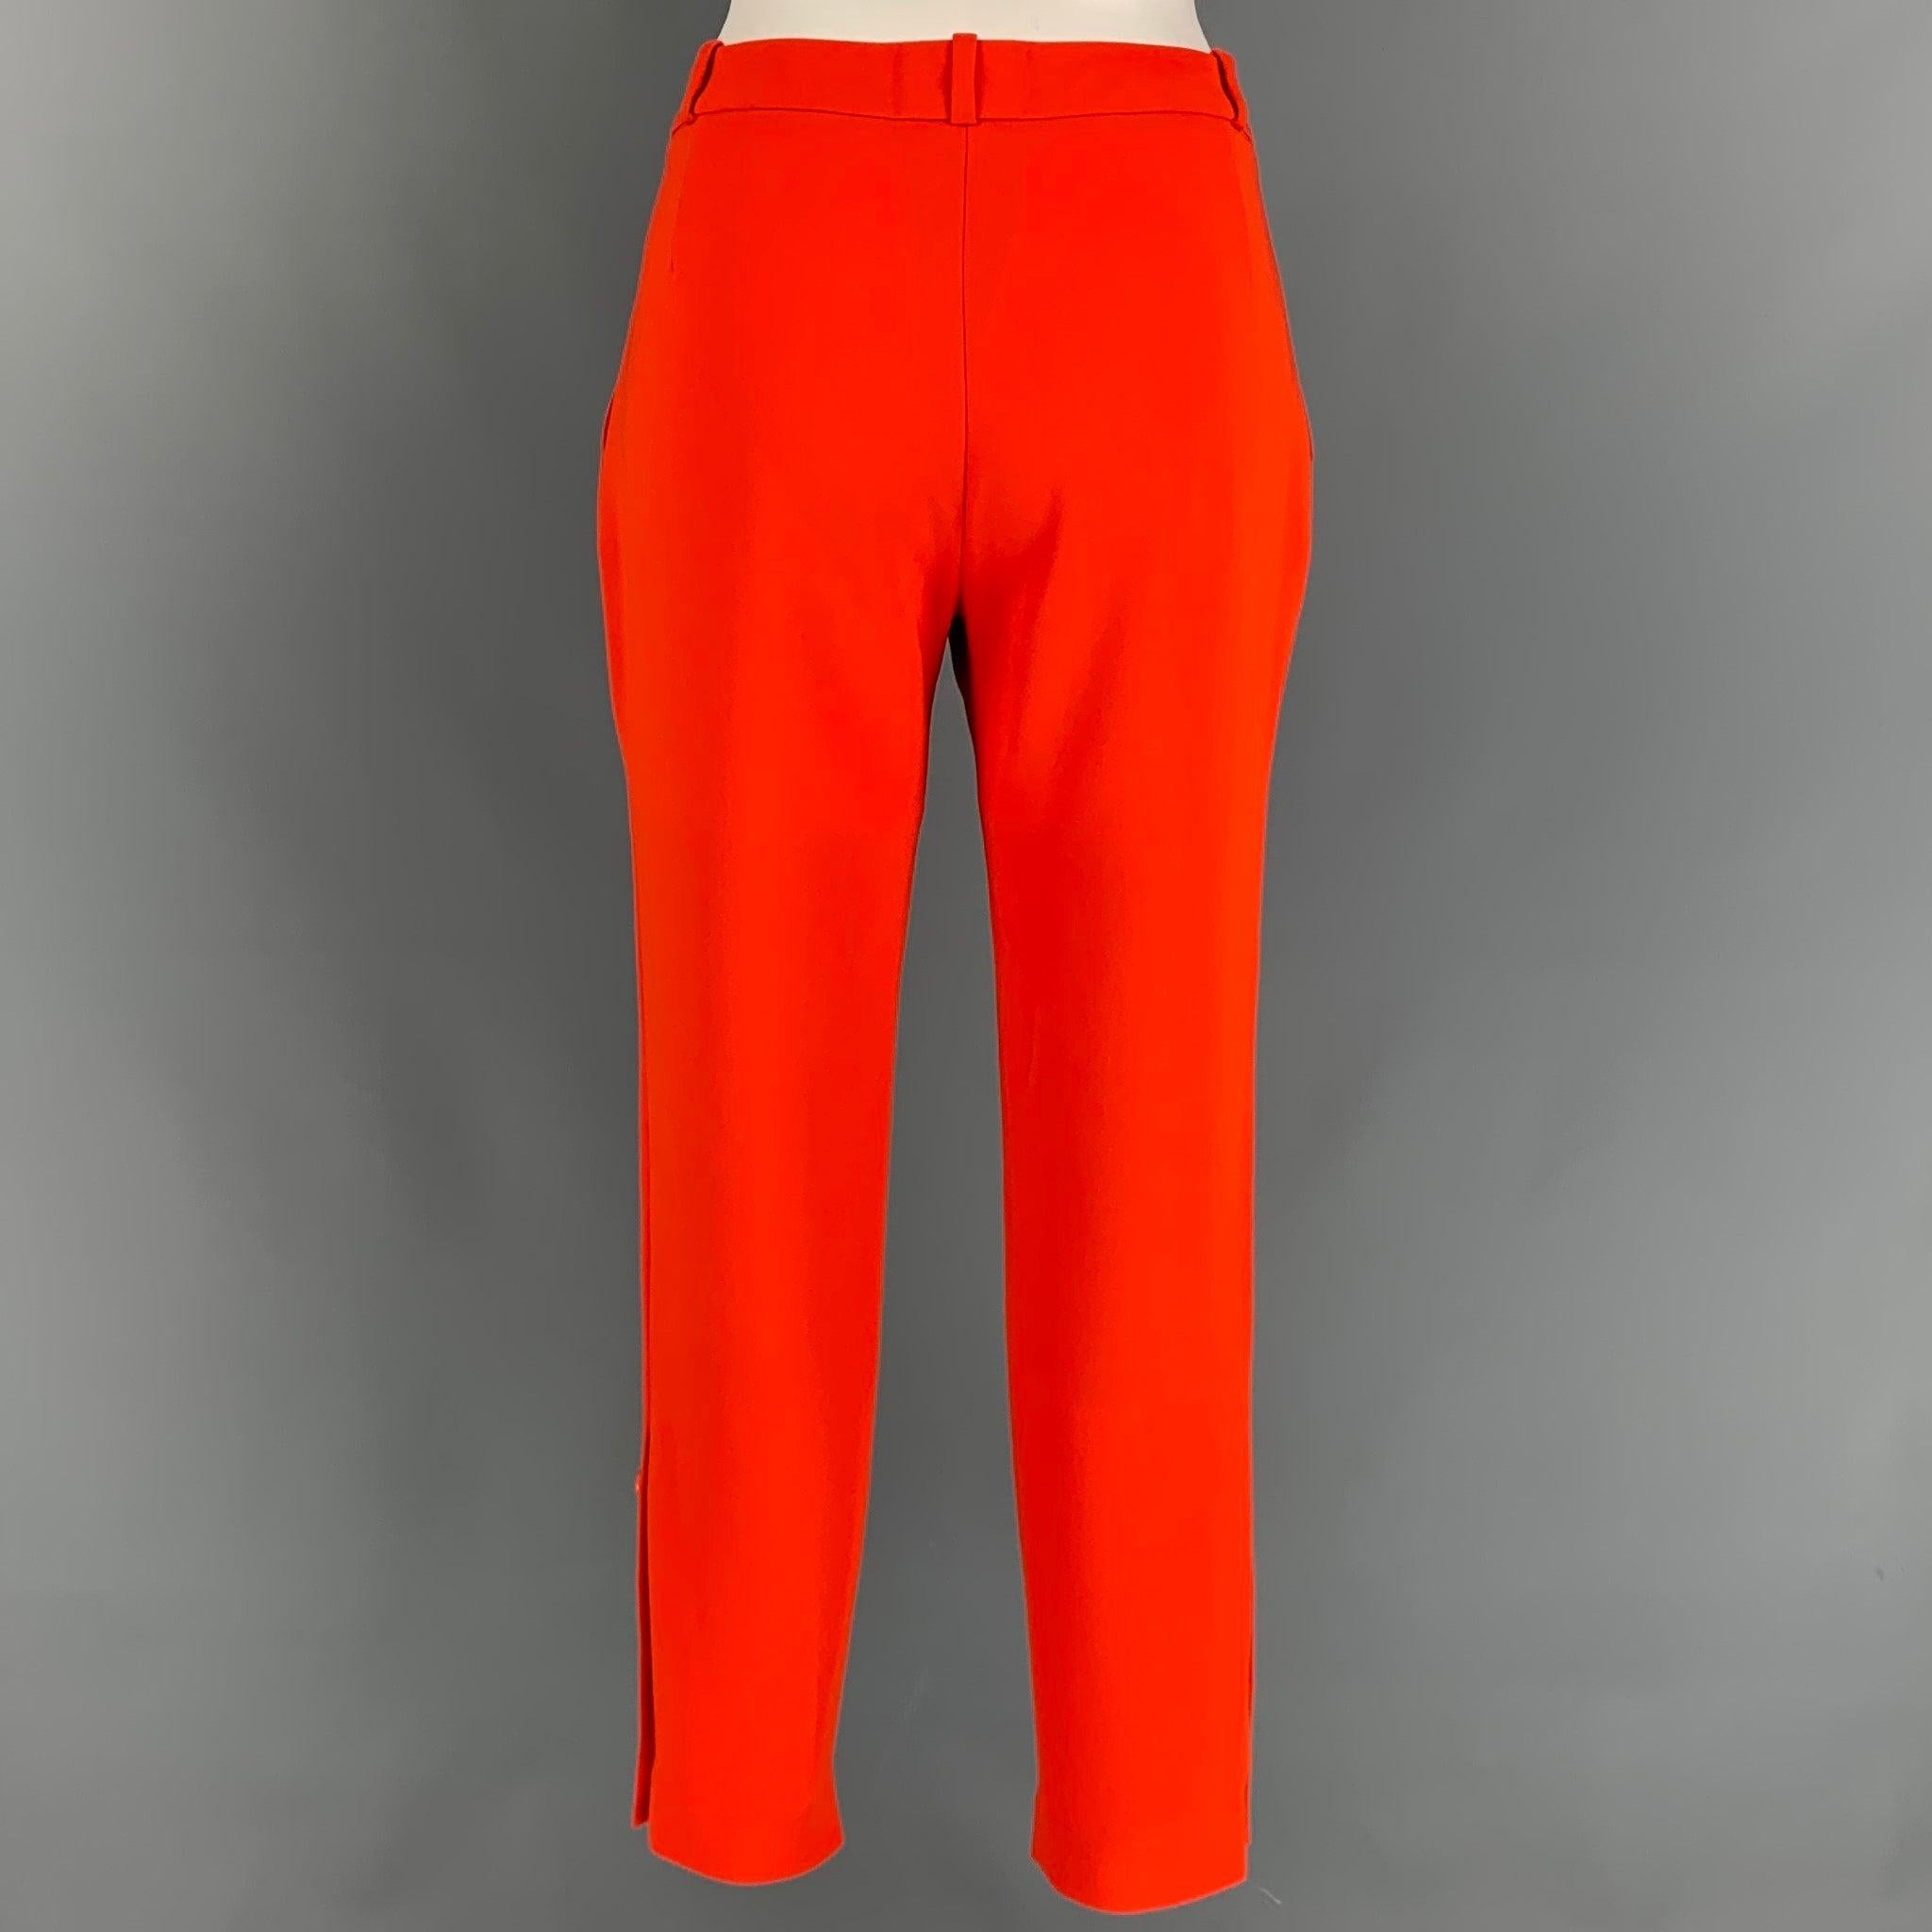 ALTUZARRA dress pants comes in a orange triacetate featuring a narrow leg, buttoned details, front tab, and a zip fly closure. Made in Italy.
Very Good
Pre-Owned Condition. 

Marked:   40 

Measurements: 
  Waist: 32 inches  Rise: 9 inches  Inseam: